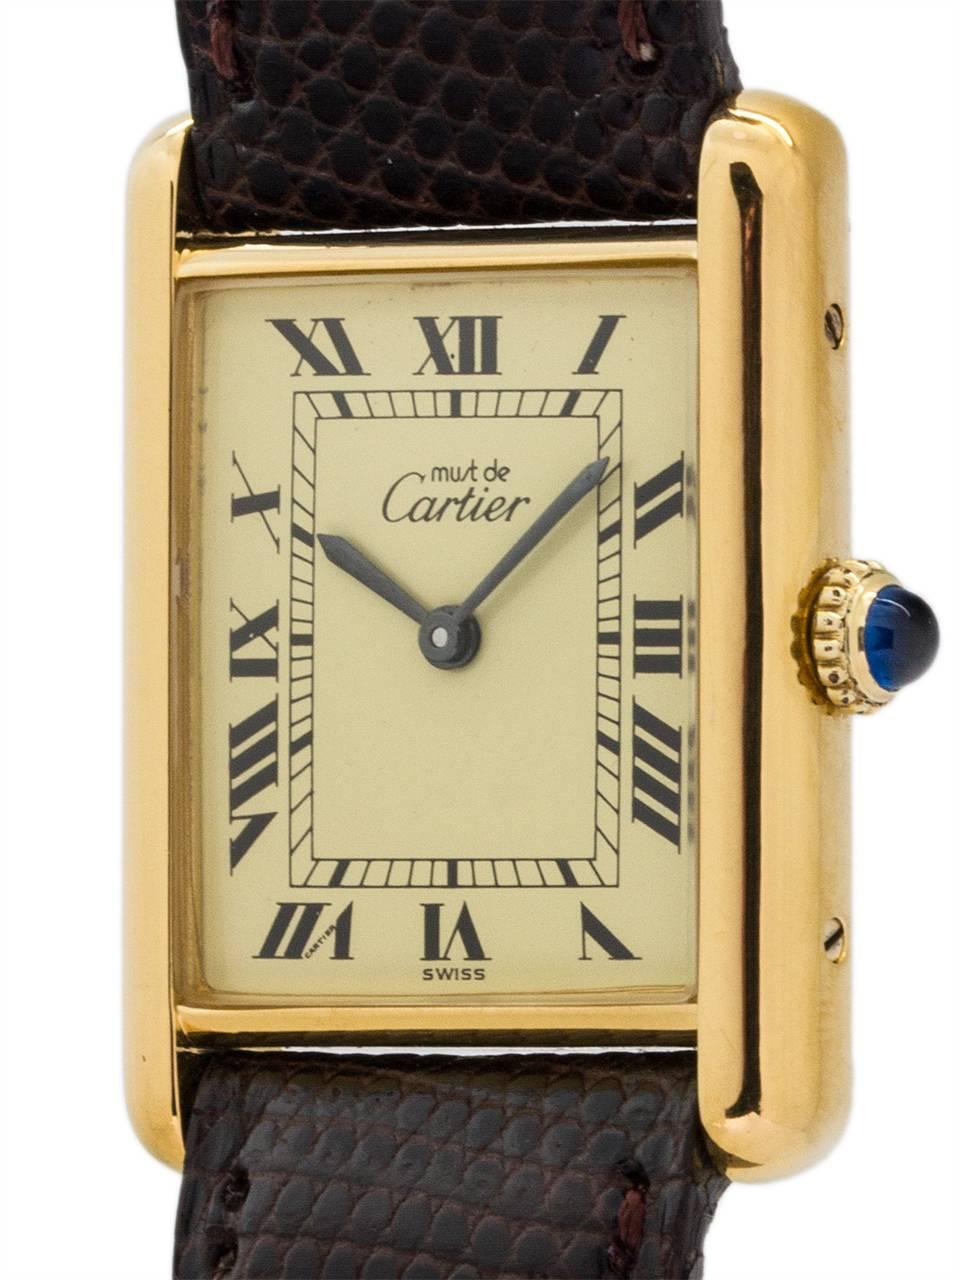 Cartier Man’s Tank Louis circa 1990s. Featuring 24 x 30mm vermeil (20 microns gold over silver) case secured by 4 side and 4 case back screws. Featuring classic cream color dial signed Must de Cartier with printed black Roman numerals and blued